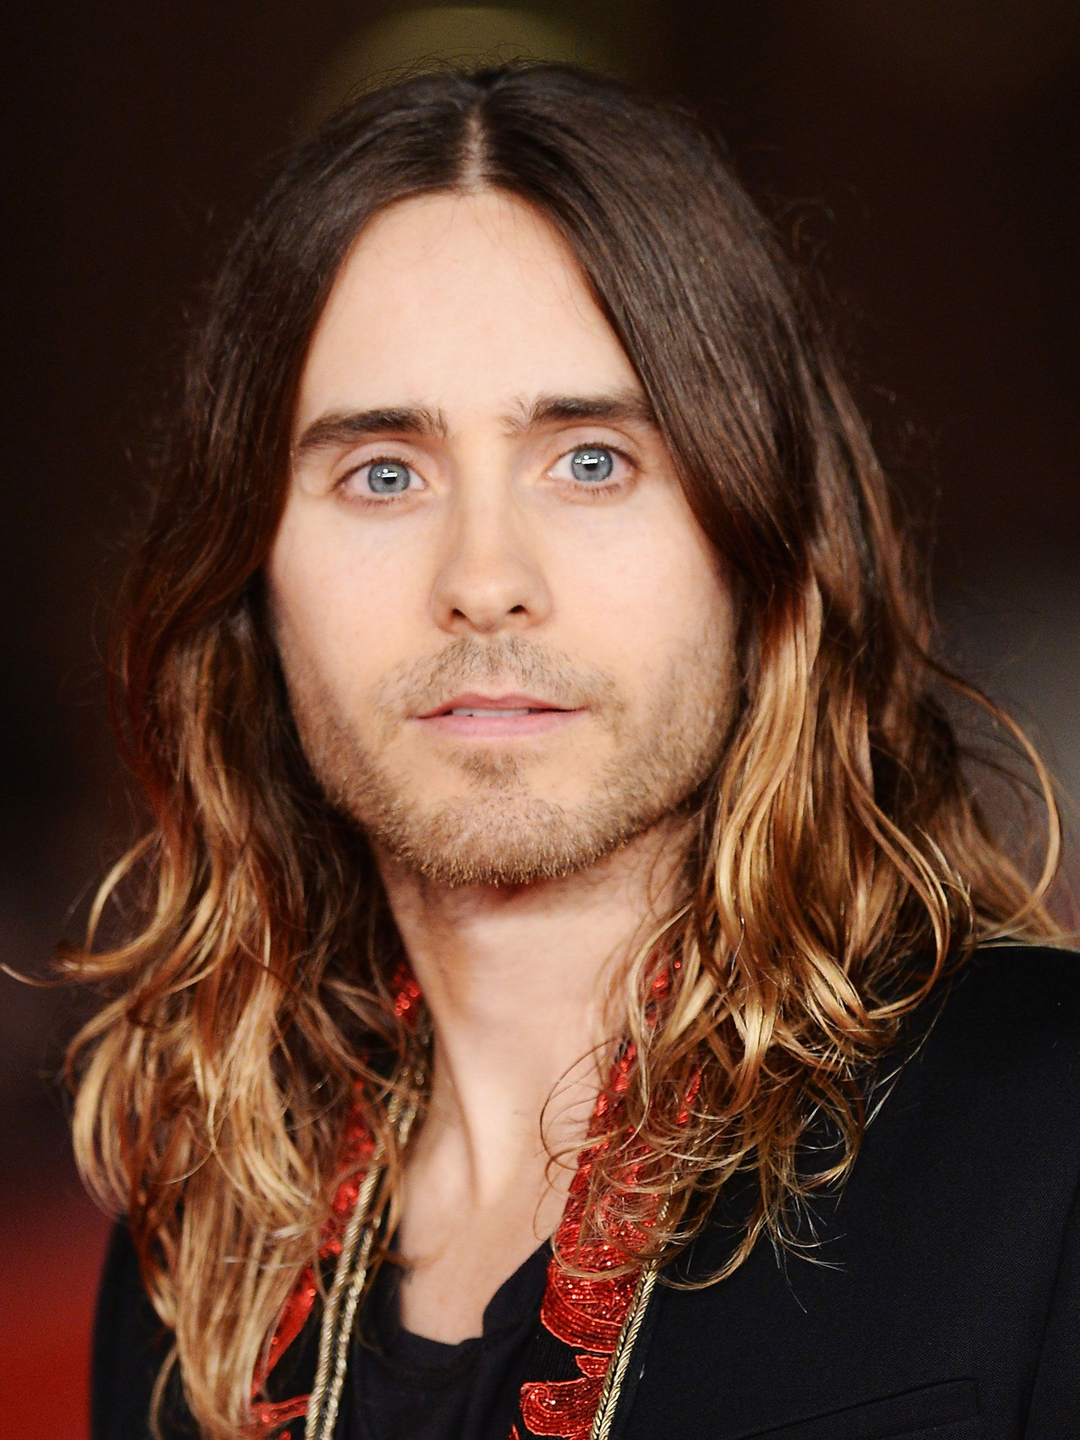 Jared Leto does he have a wife